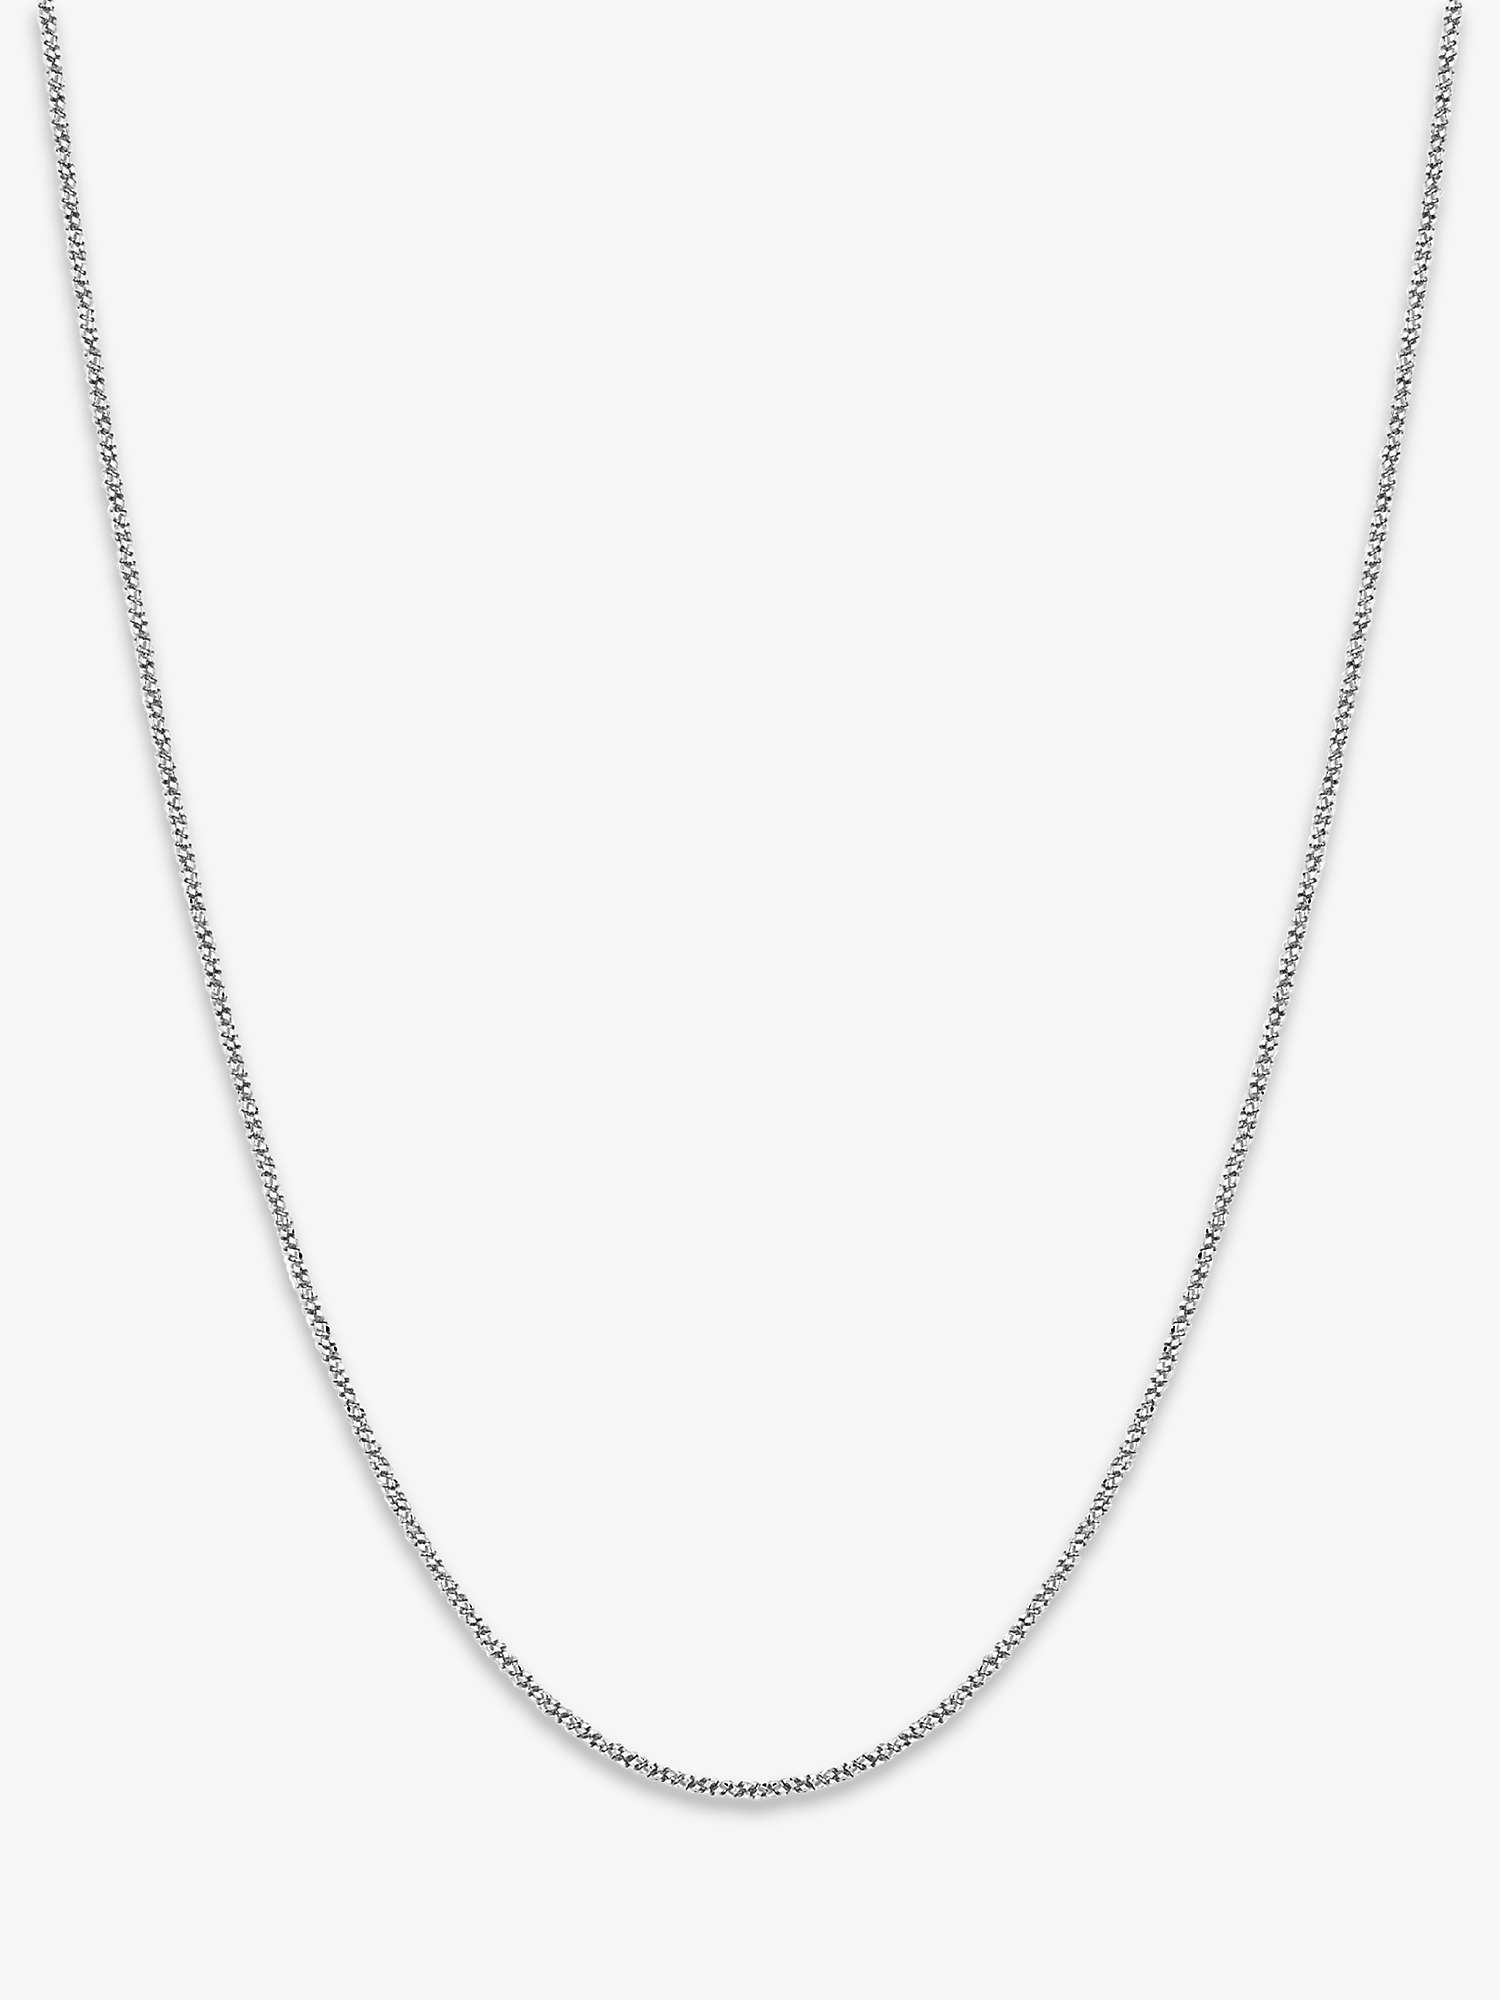 Simply Silver Twist Chain Necklace, Silver at John Lewis & Partners